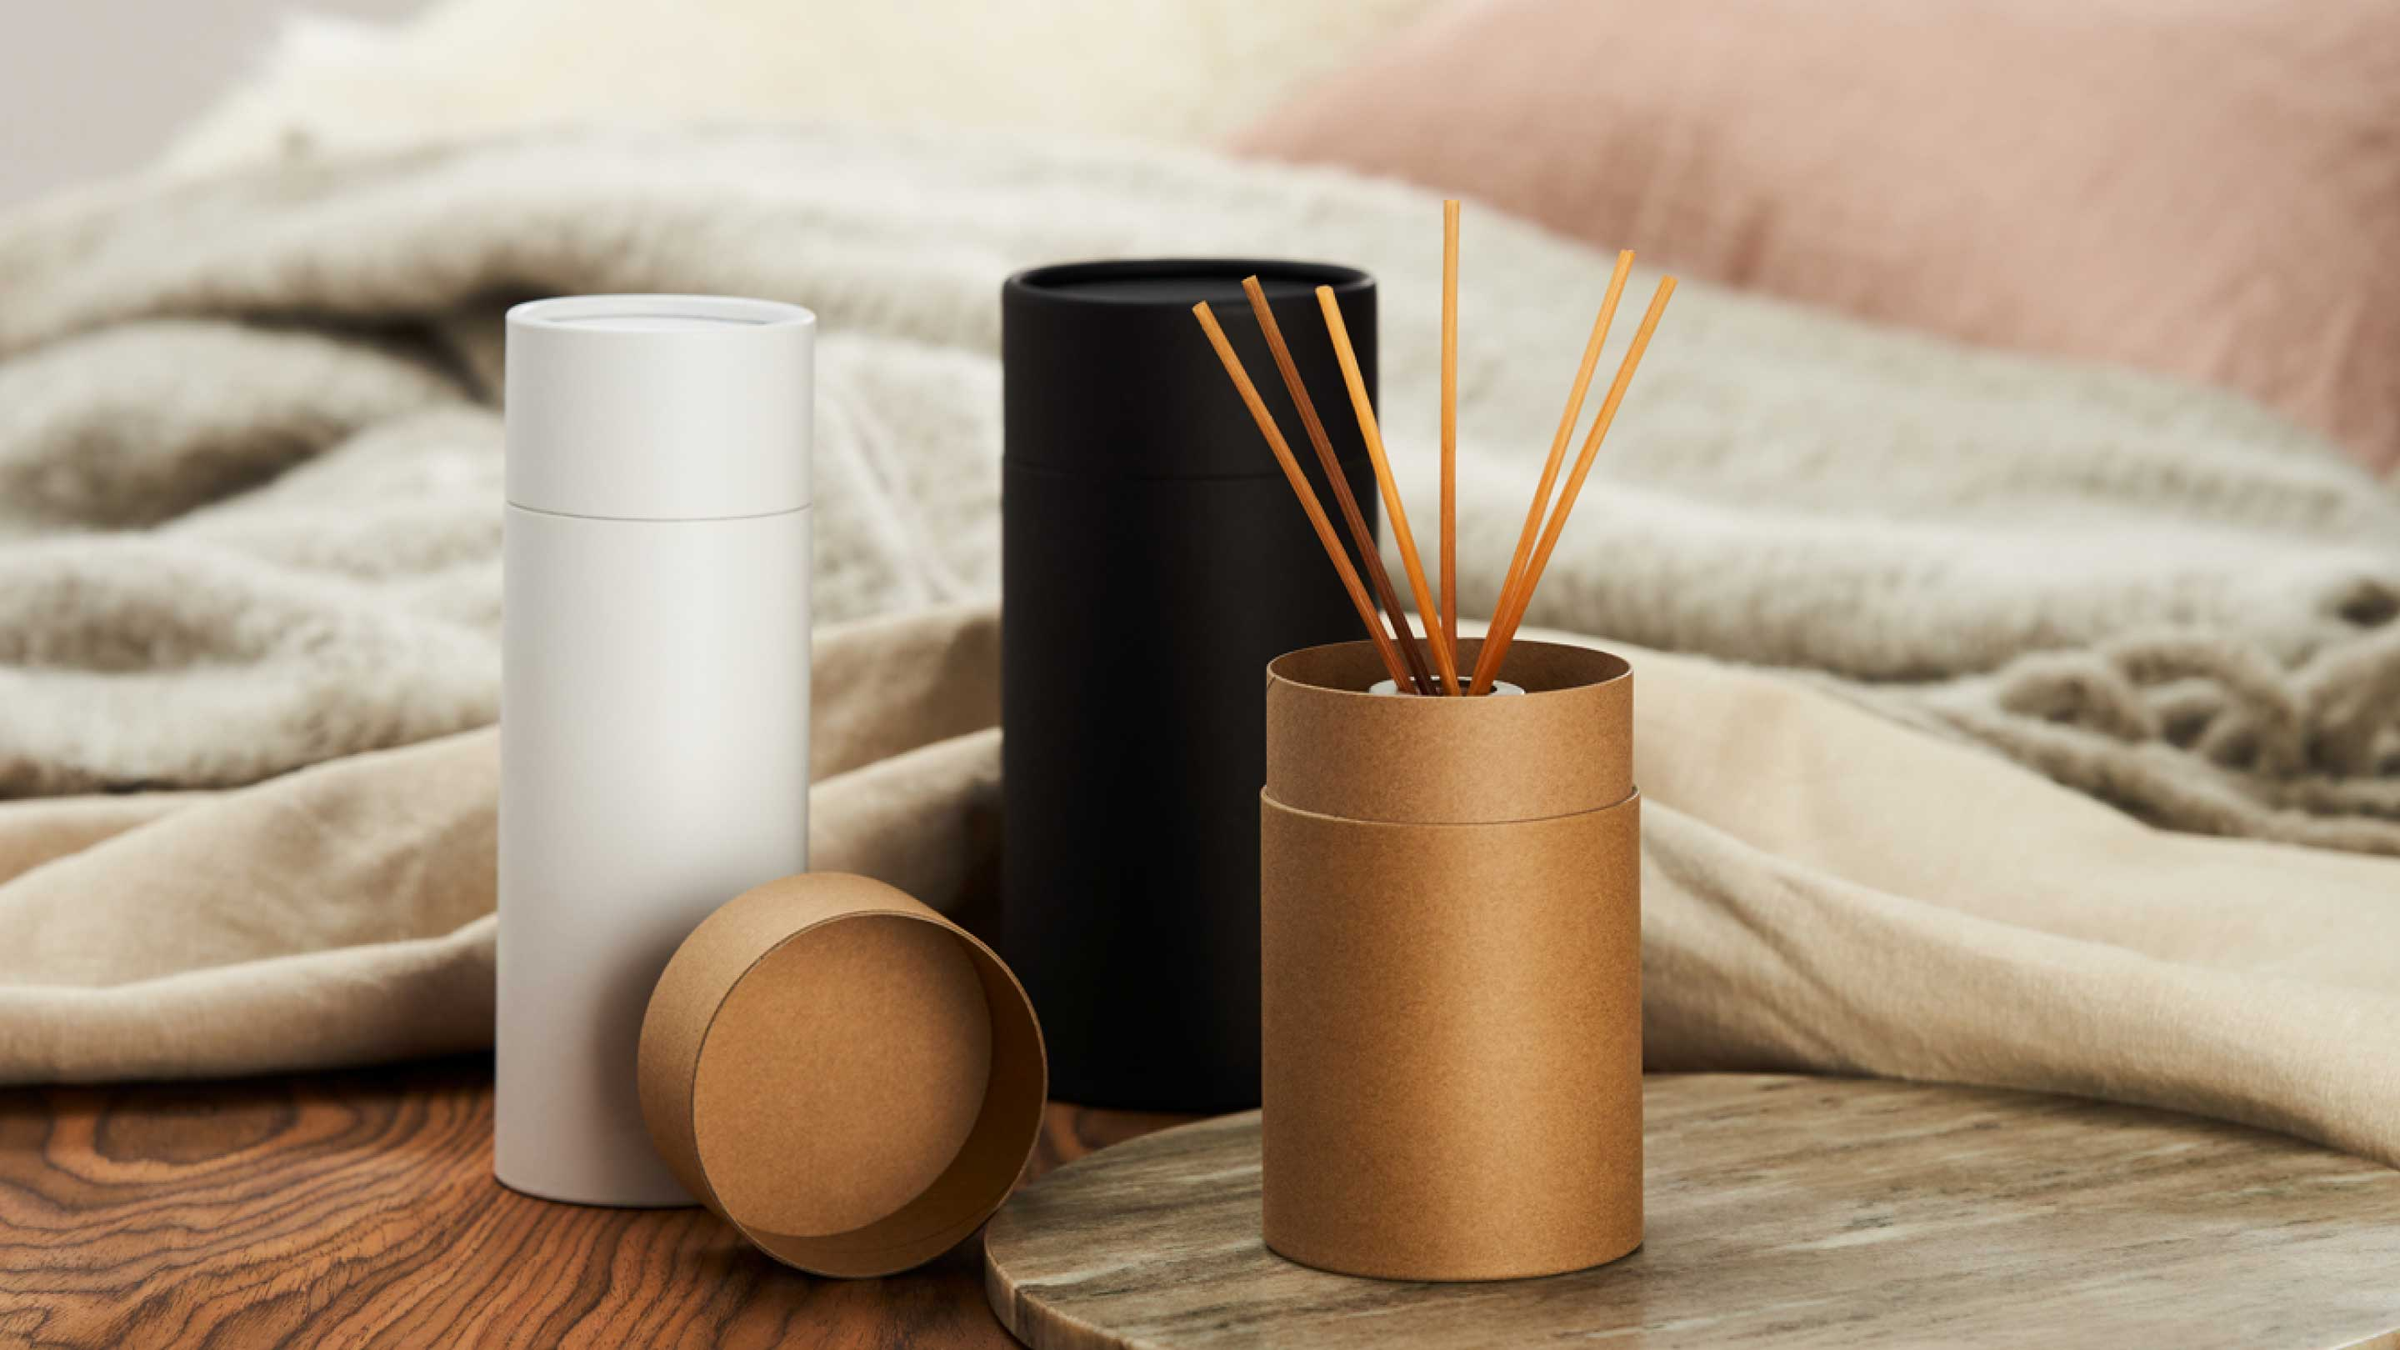 Three different coloured cardboard tubes in black, white and brown in a lounge with diffusers inside.